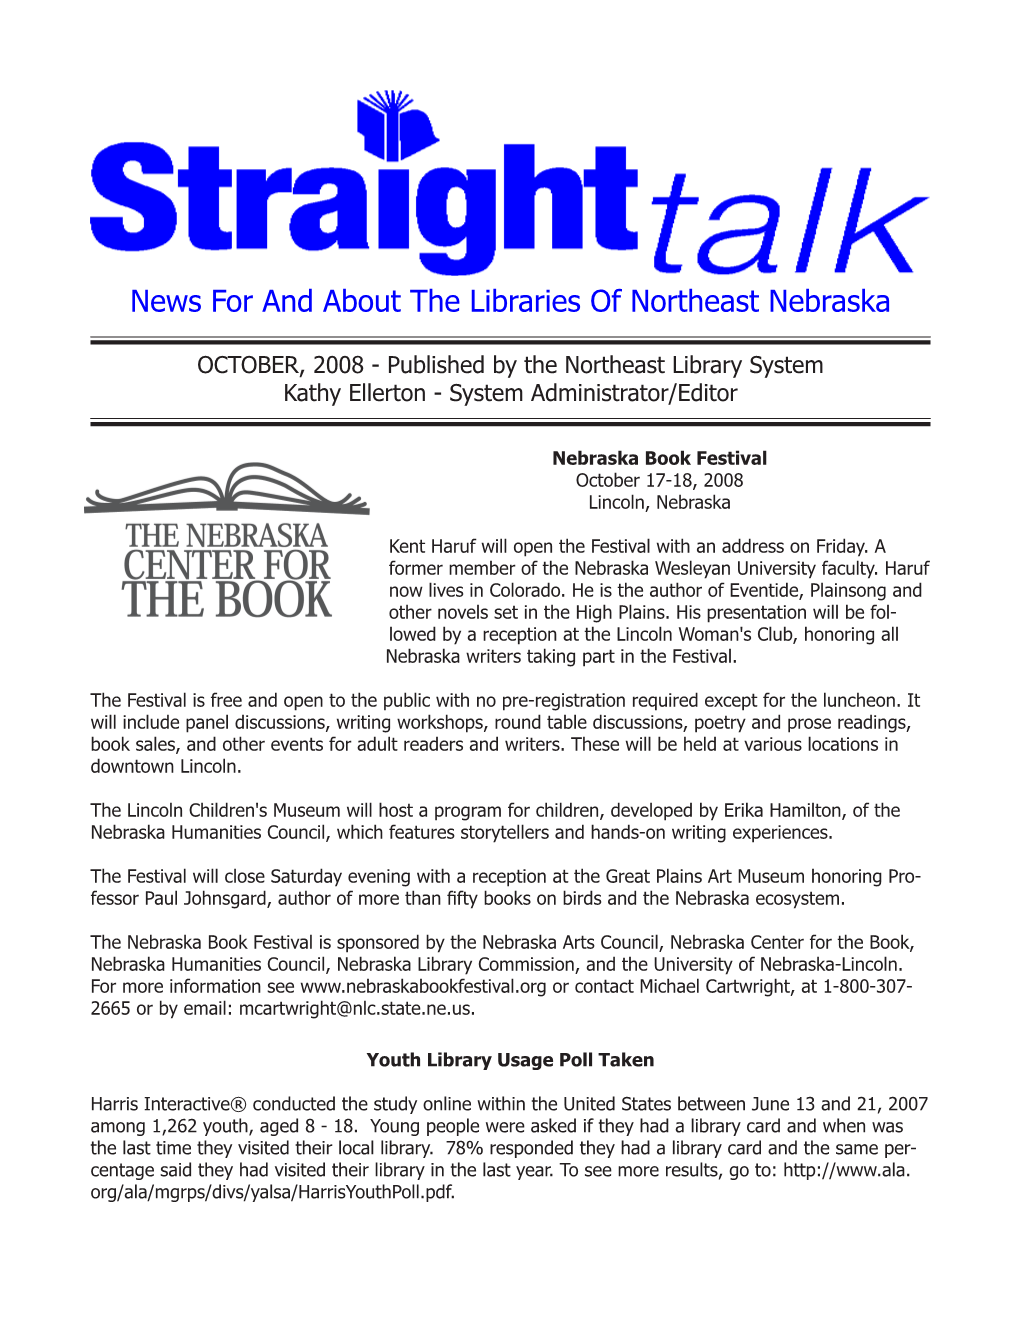 News for and About the Libraries of Northeast Nebraska